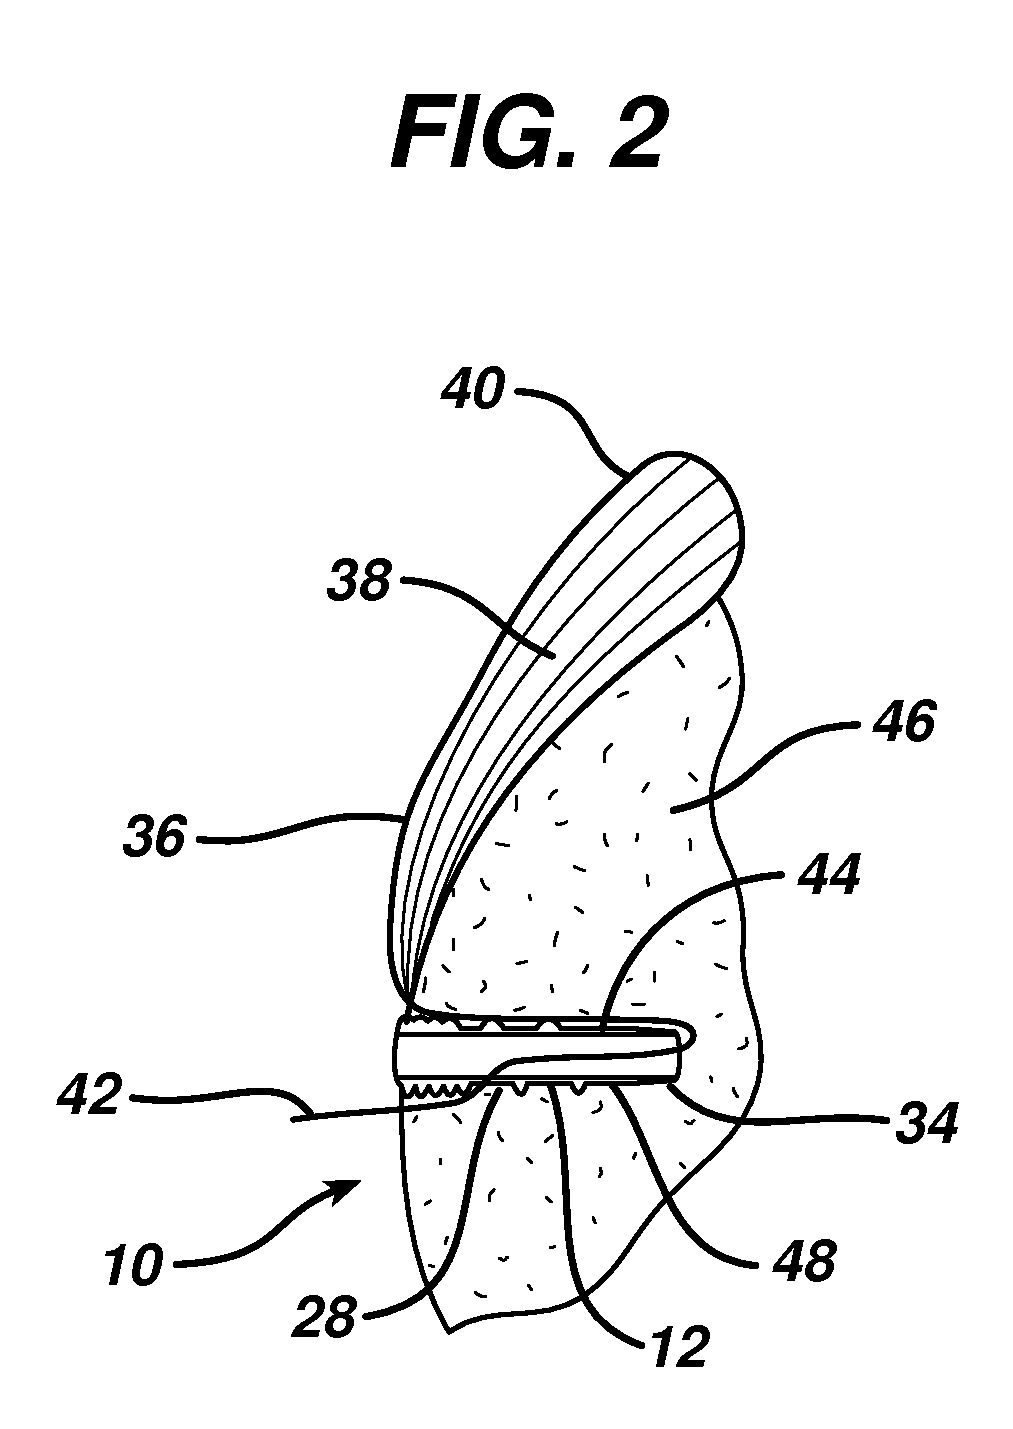 Knotless suture anchor and driver